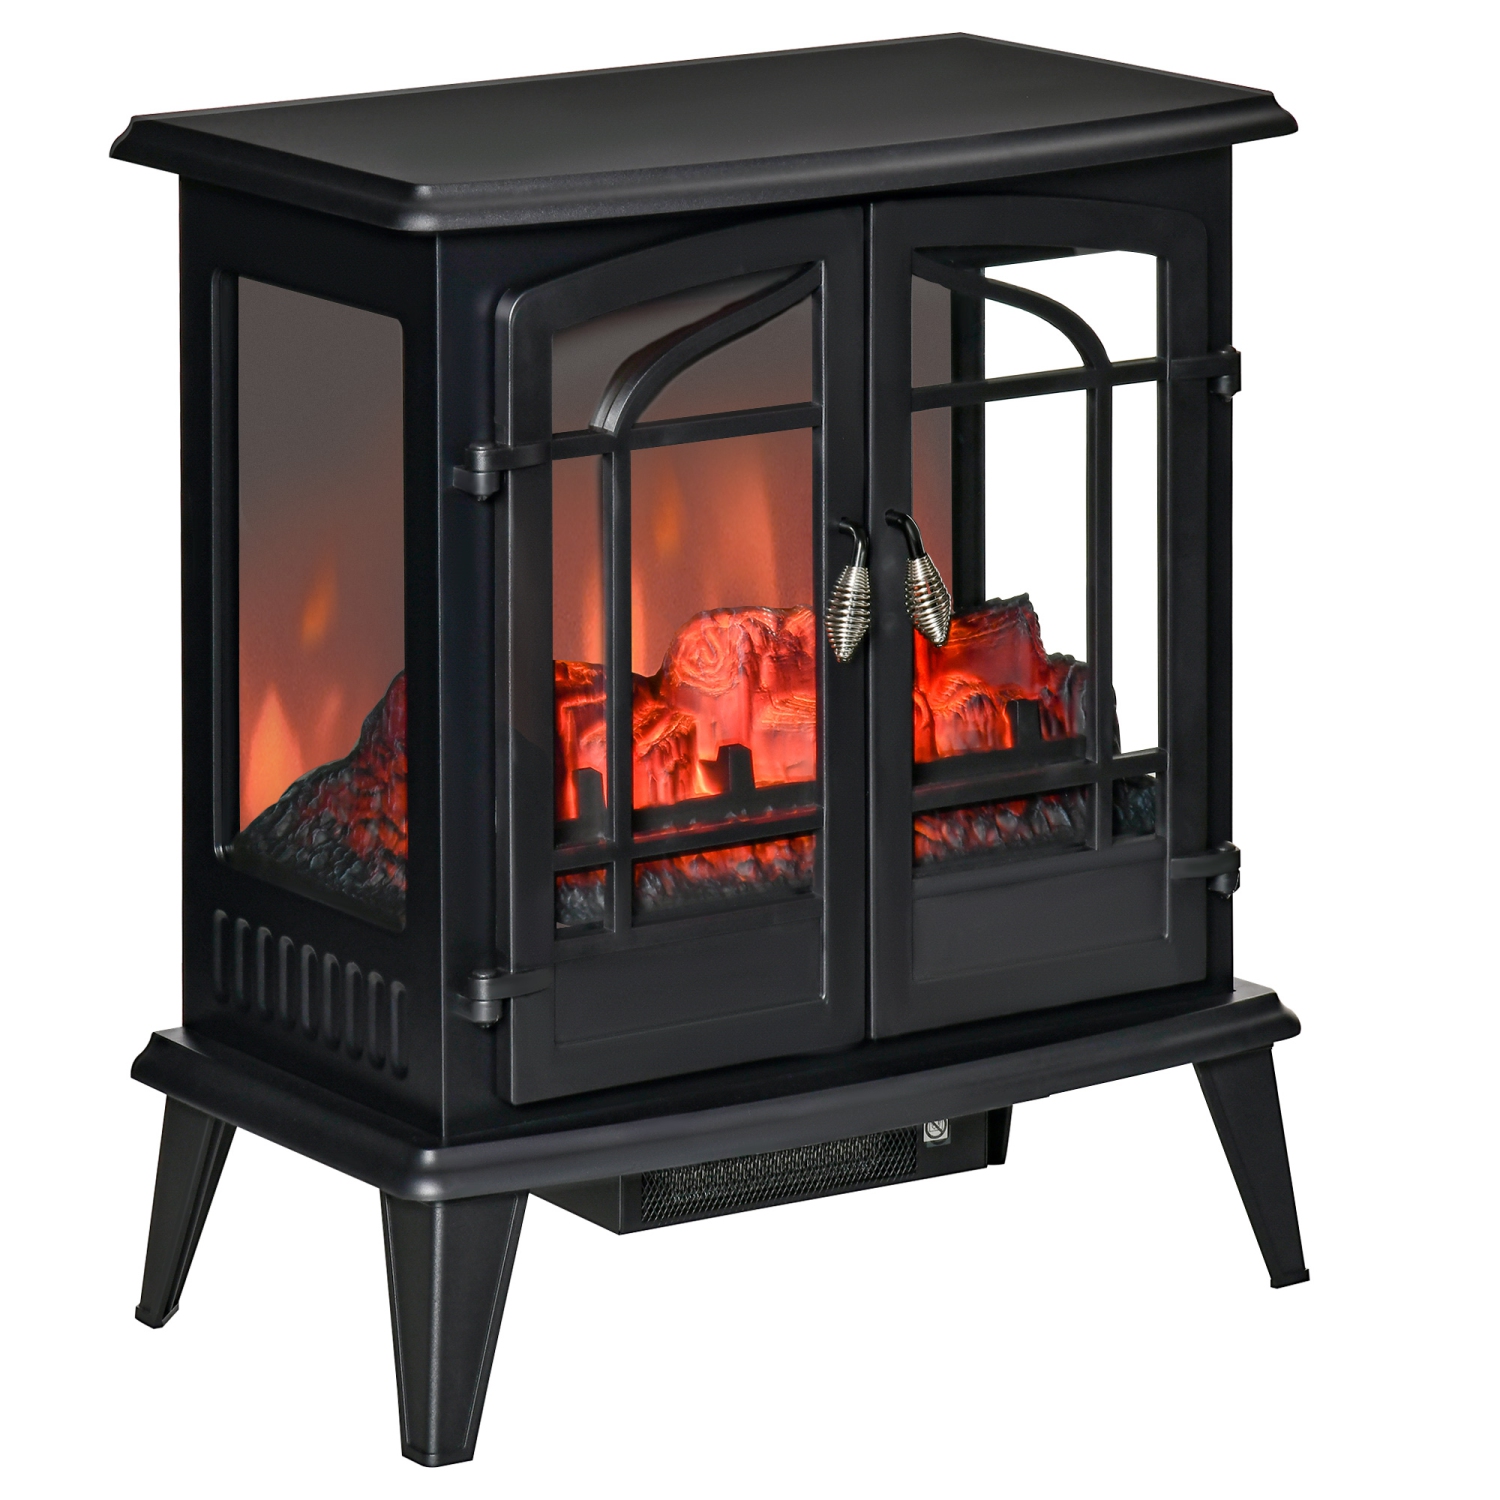 HOMCOM Electric Fireplace Heater Freestanding Fireplace Stove with Realistic Flame Effect, Adjustable Temperature and Overheat Protection, 1400W, Black